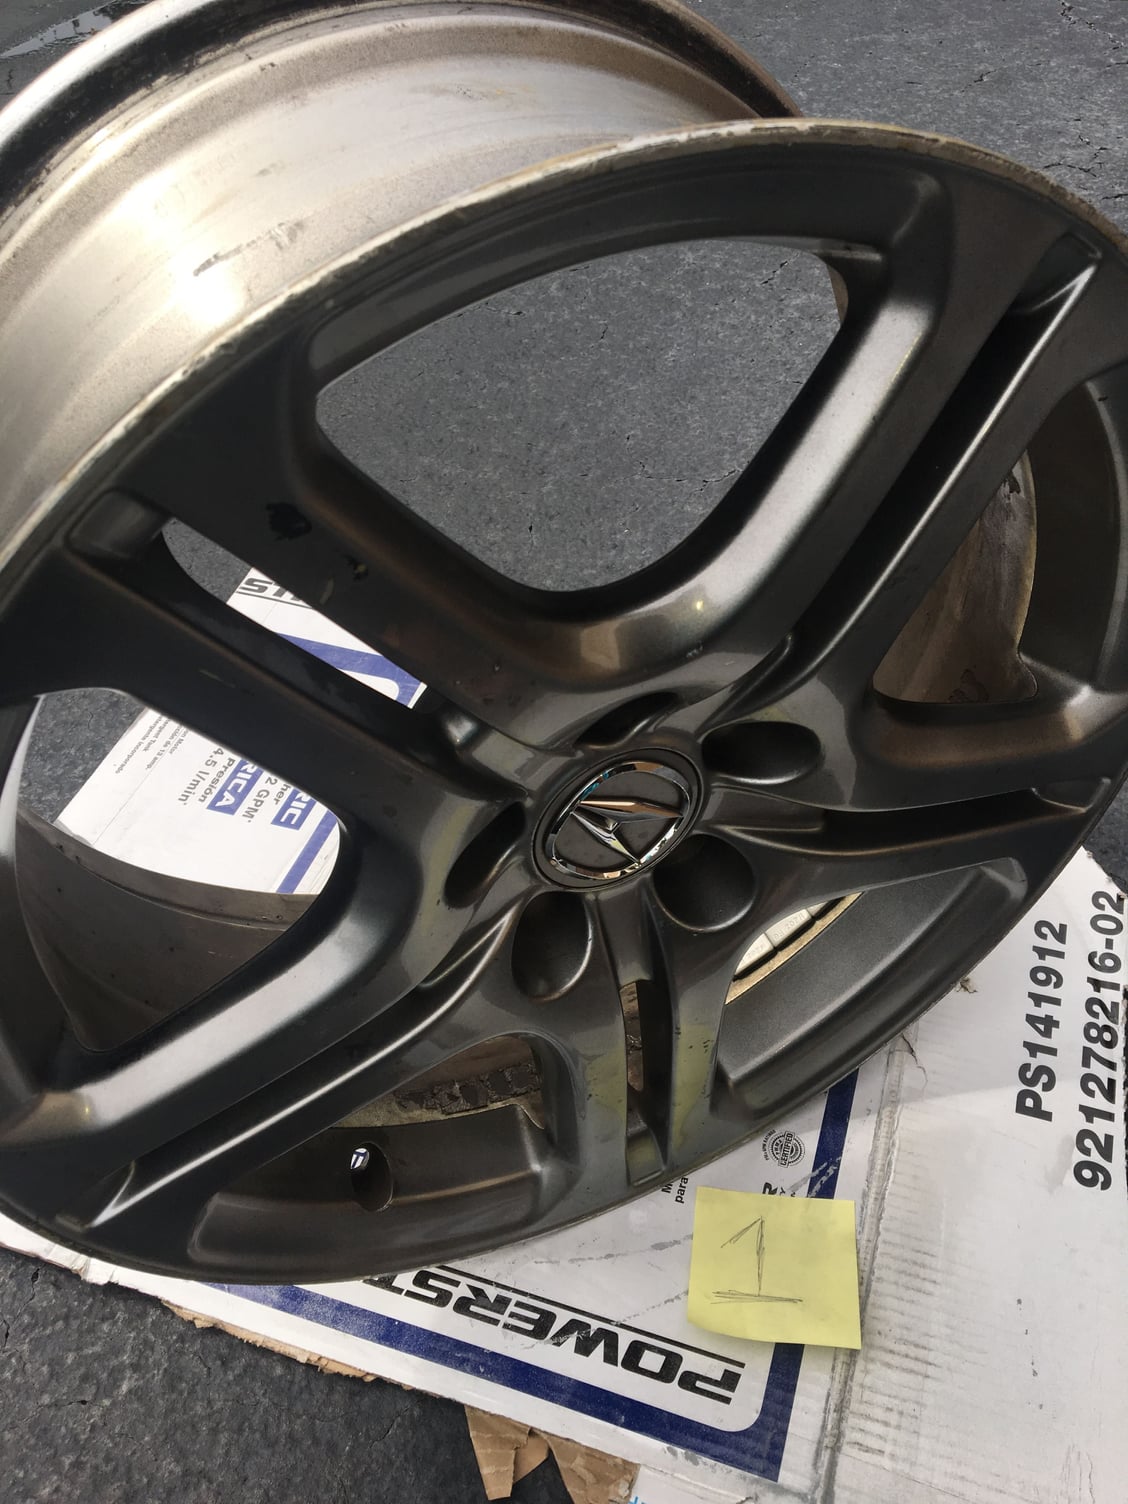 Wheels and Tires/Axles - SOLD: Gunmetal Acura A-Spec 18x8 Wheels - Used - 2004 to 2008 Acura TL - 2004 to 2008 Acura TSX - Boynton Beach, FL 33437, United States